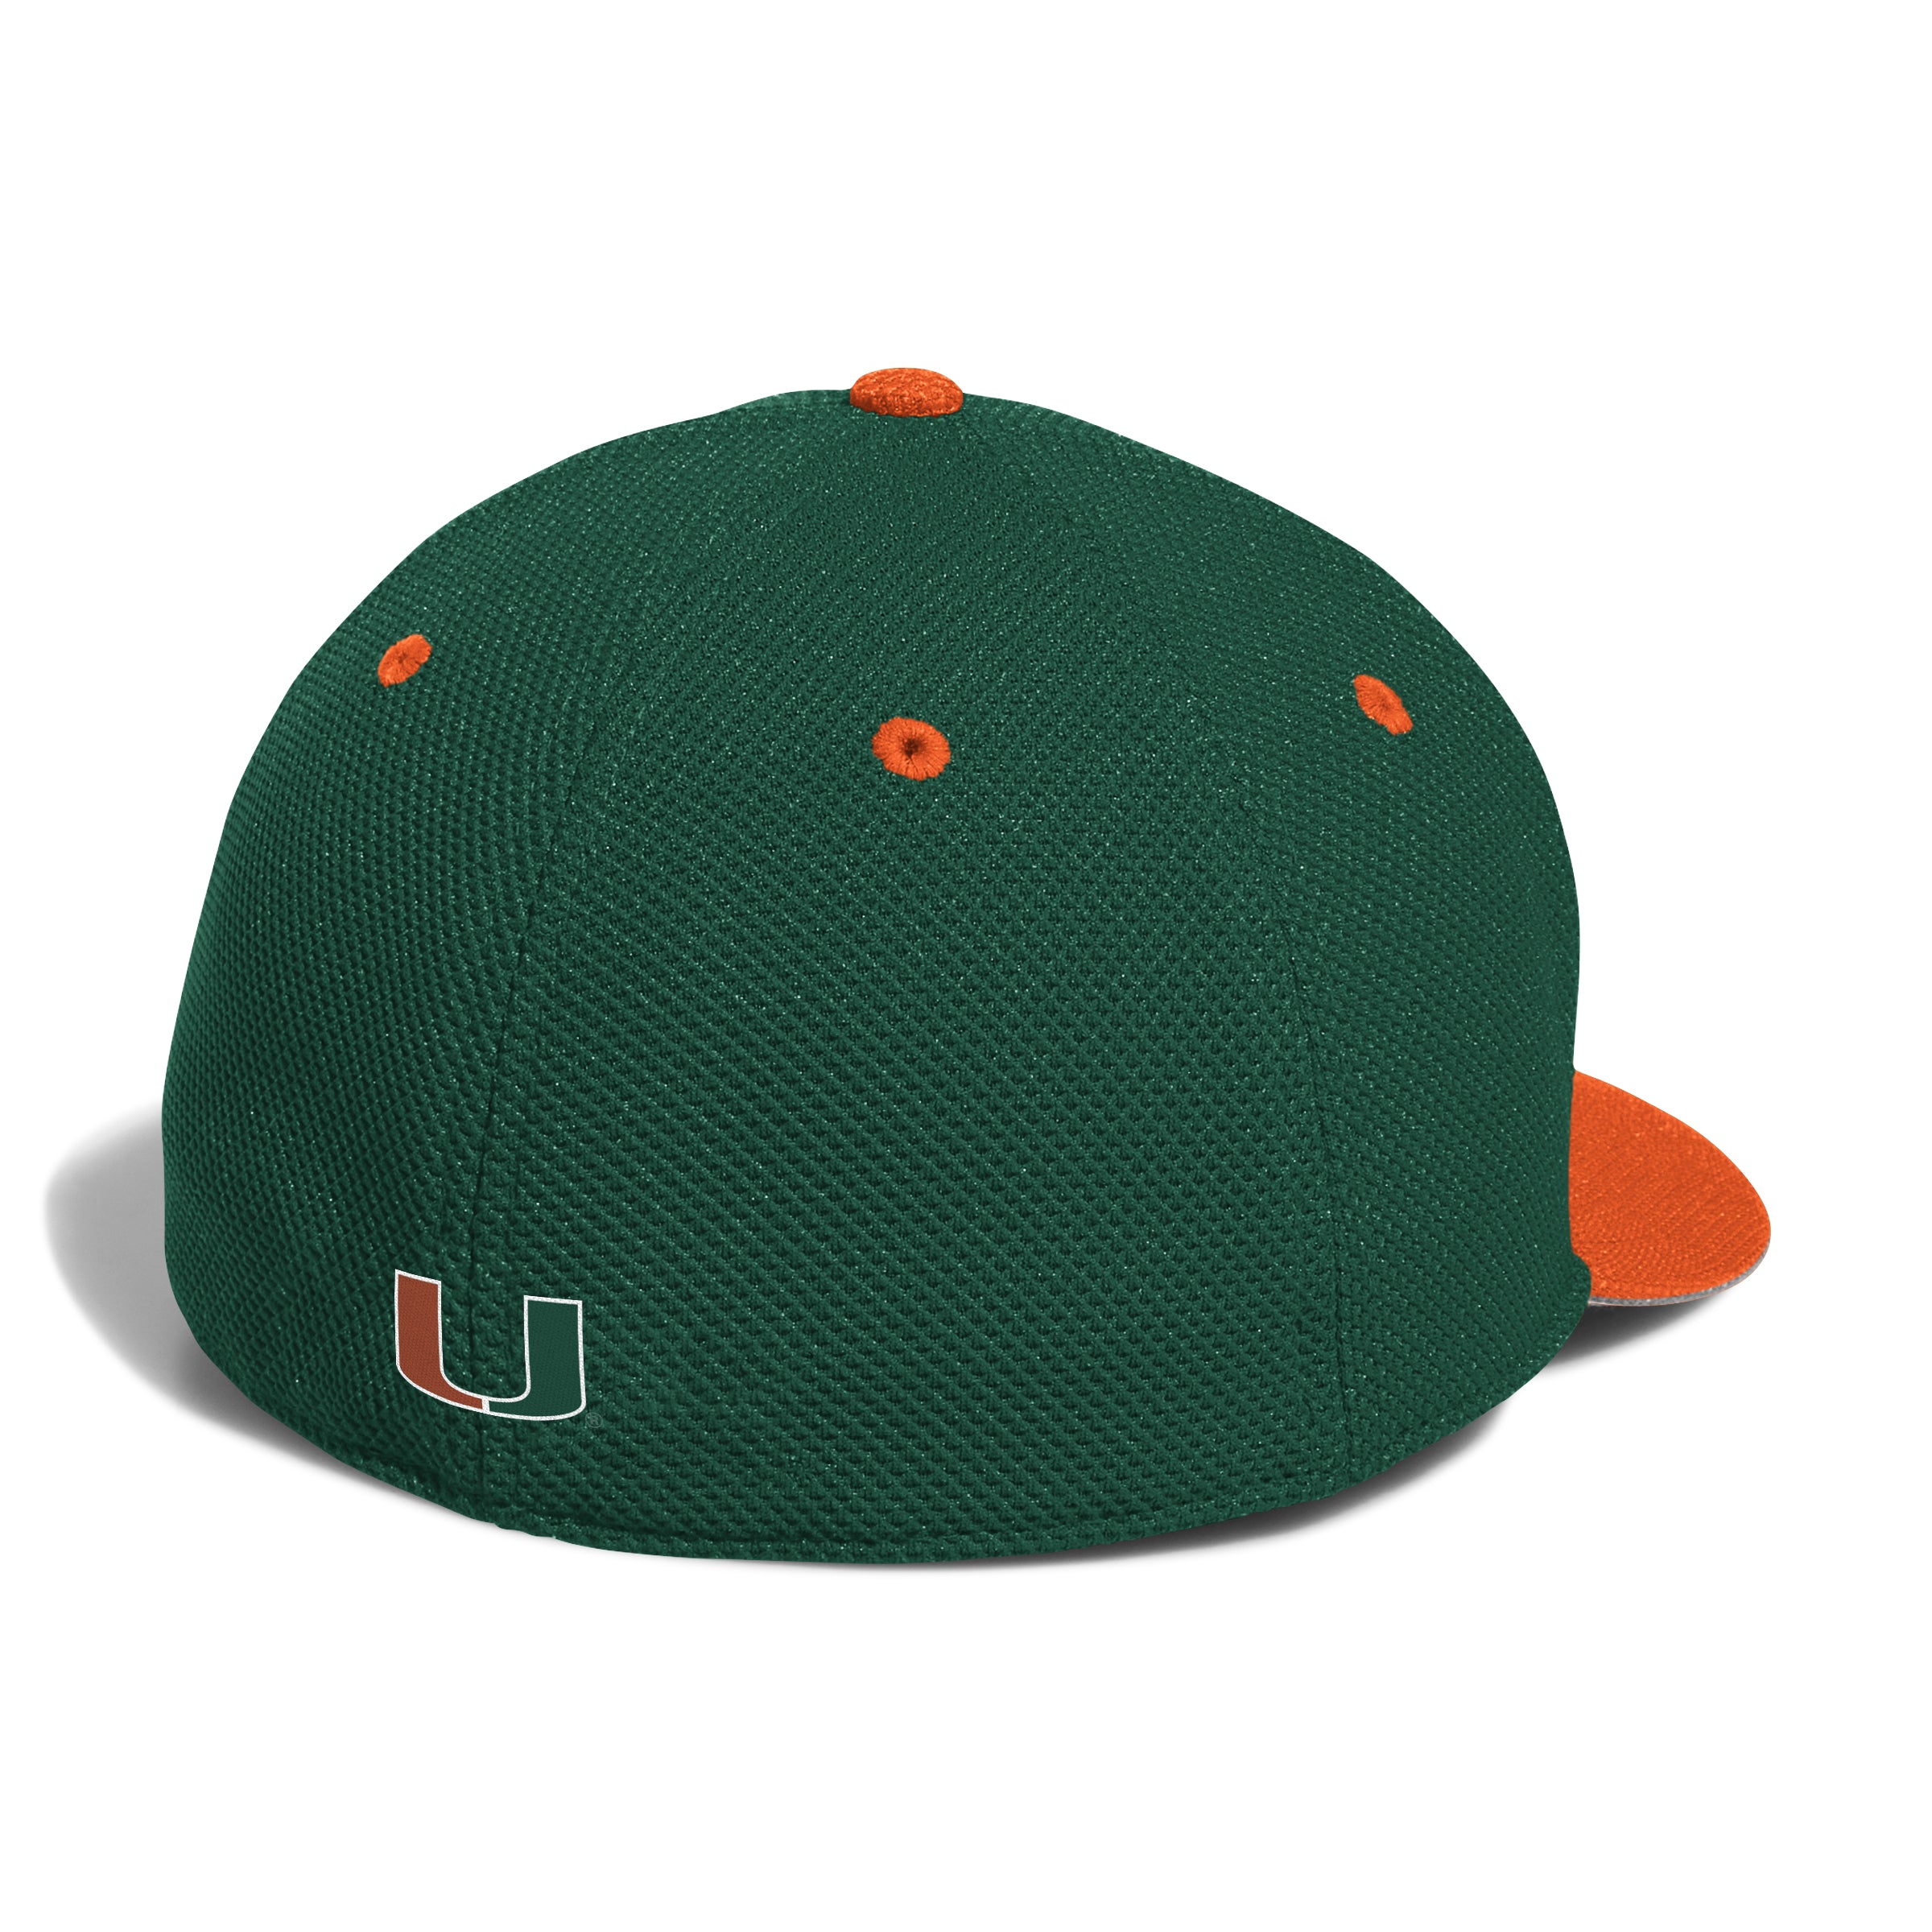 Miami Hurricanes adidas On-Field Old English M Traditional Mesh Fitted Baseball Hat - Green